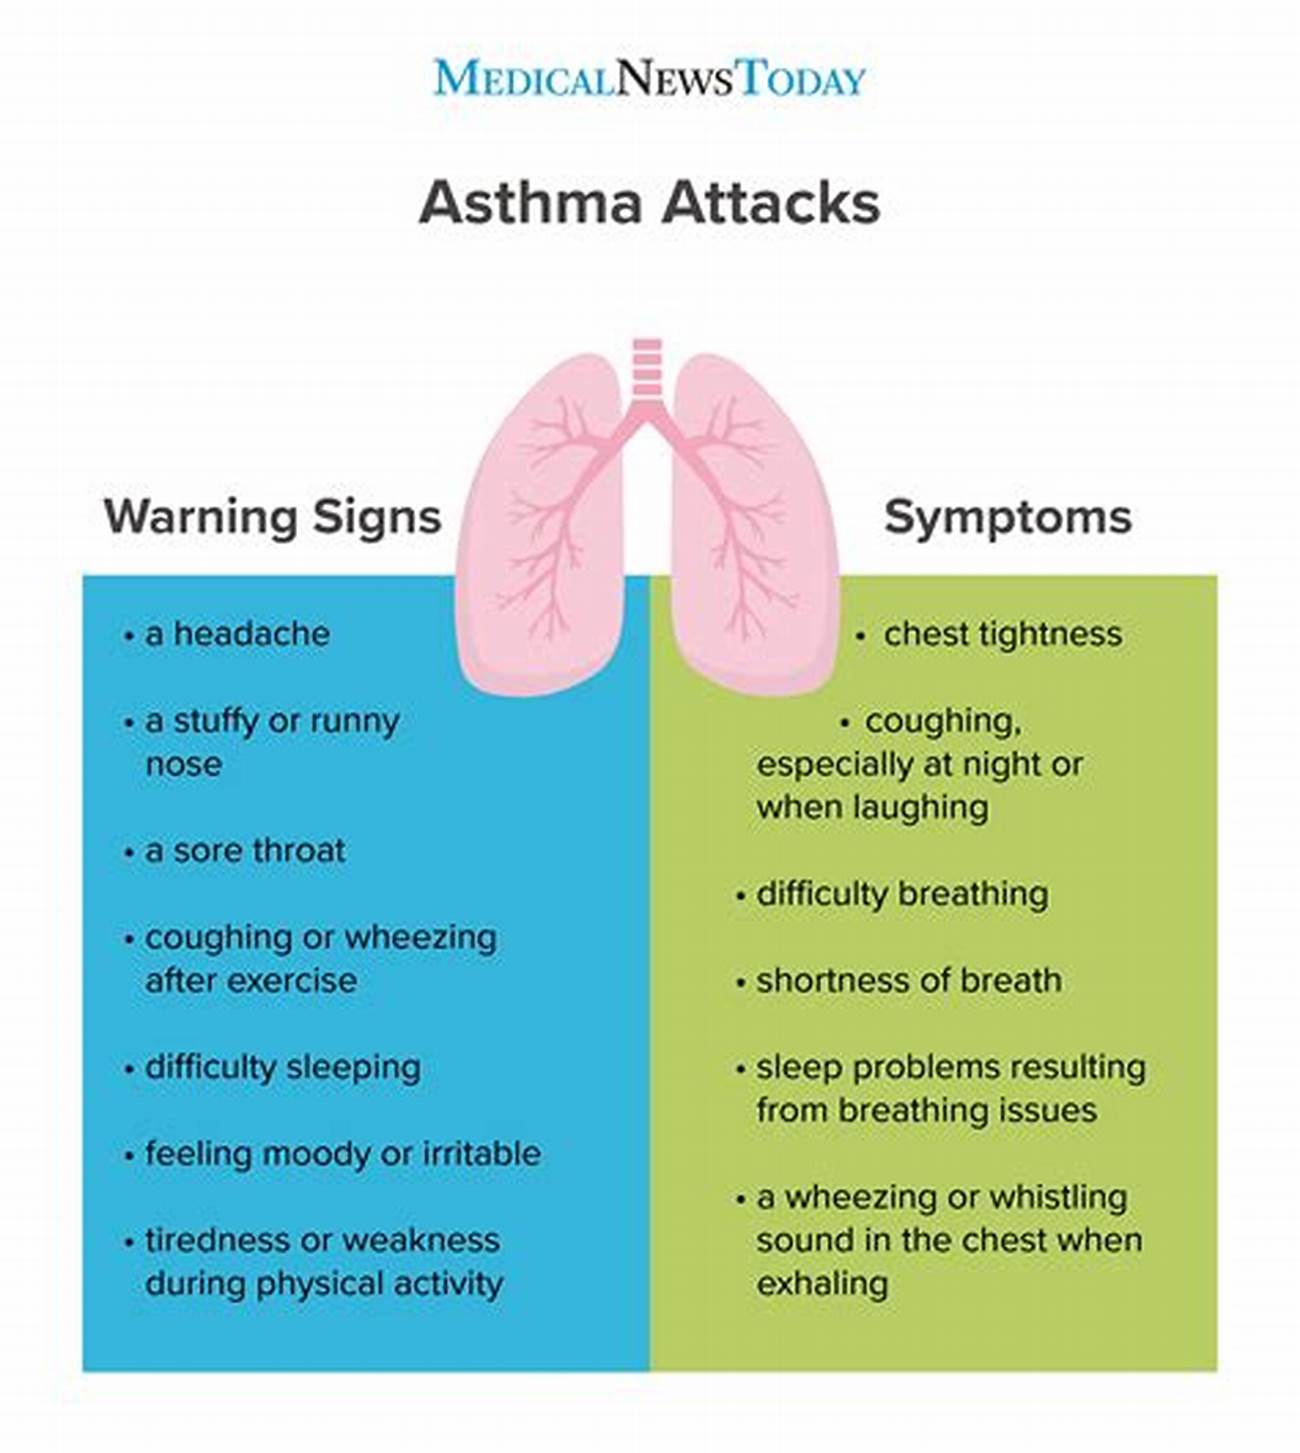  Asthma Symptoms And Treatment Prevent Asthma: What You Need To Know About Asthma: Asthma Action Plan